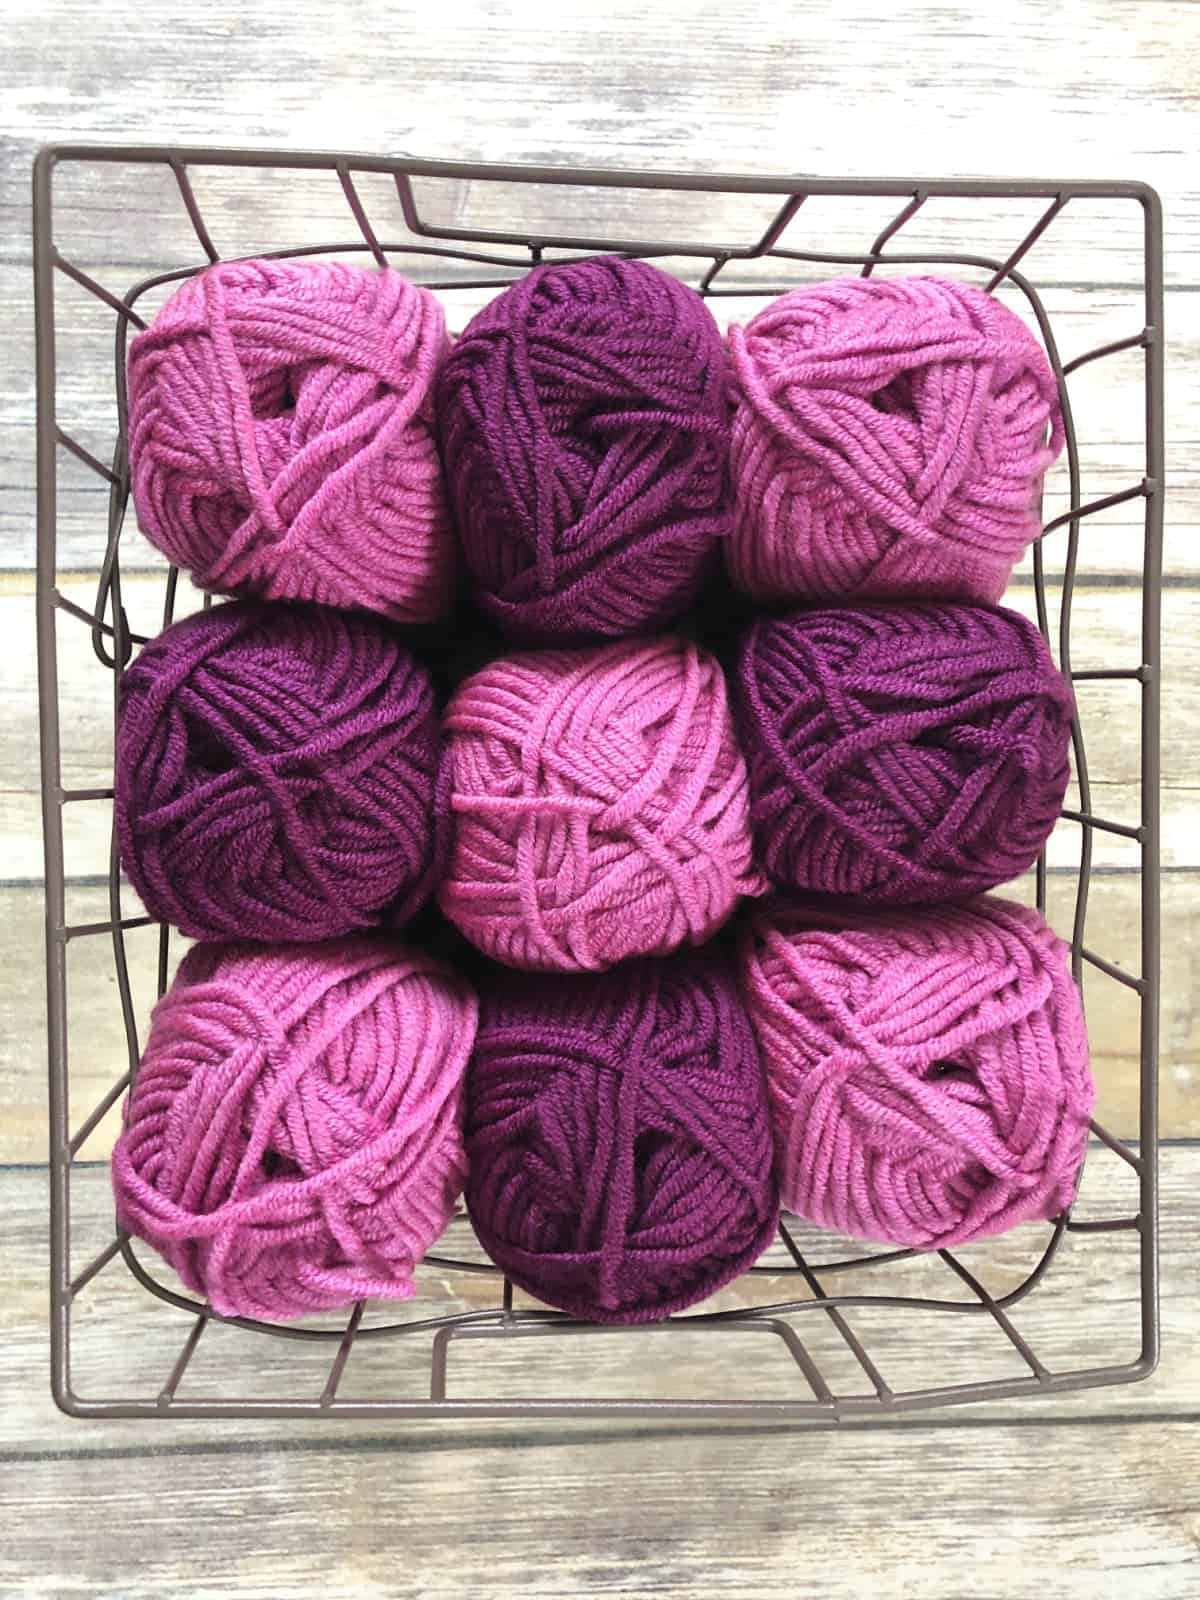 Pink and purple yarn in basket.